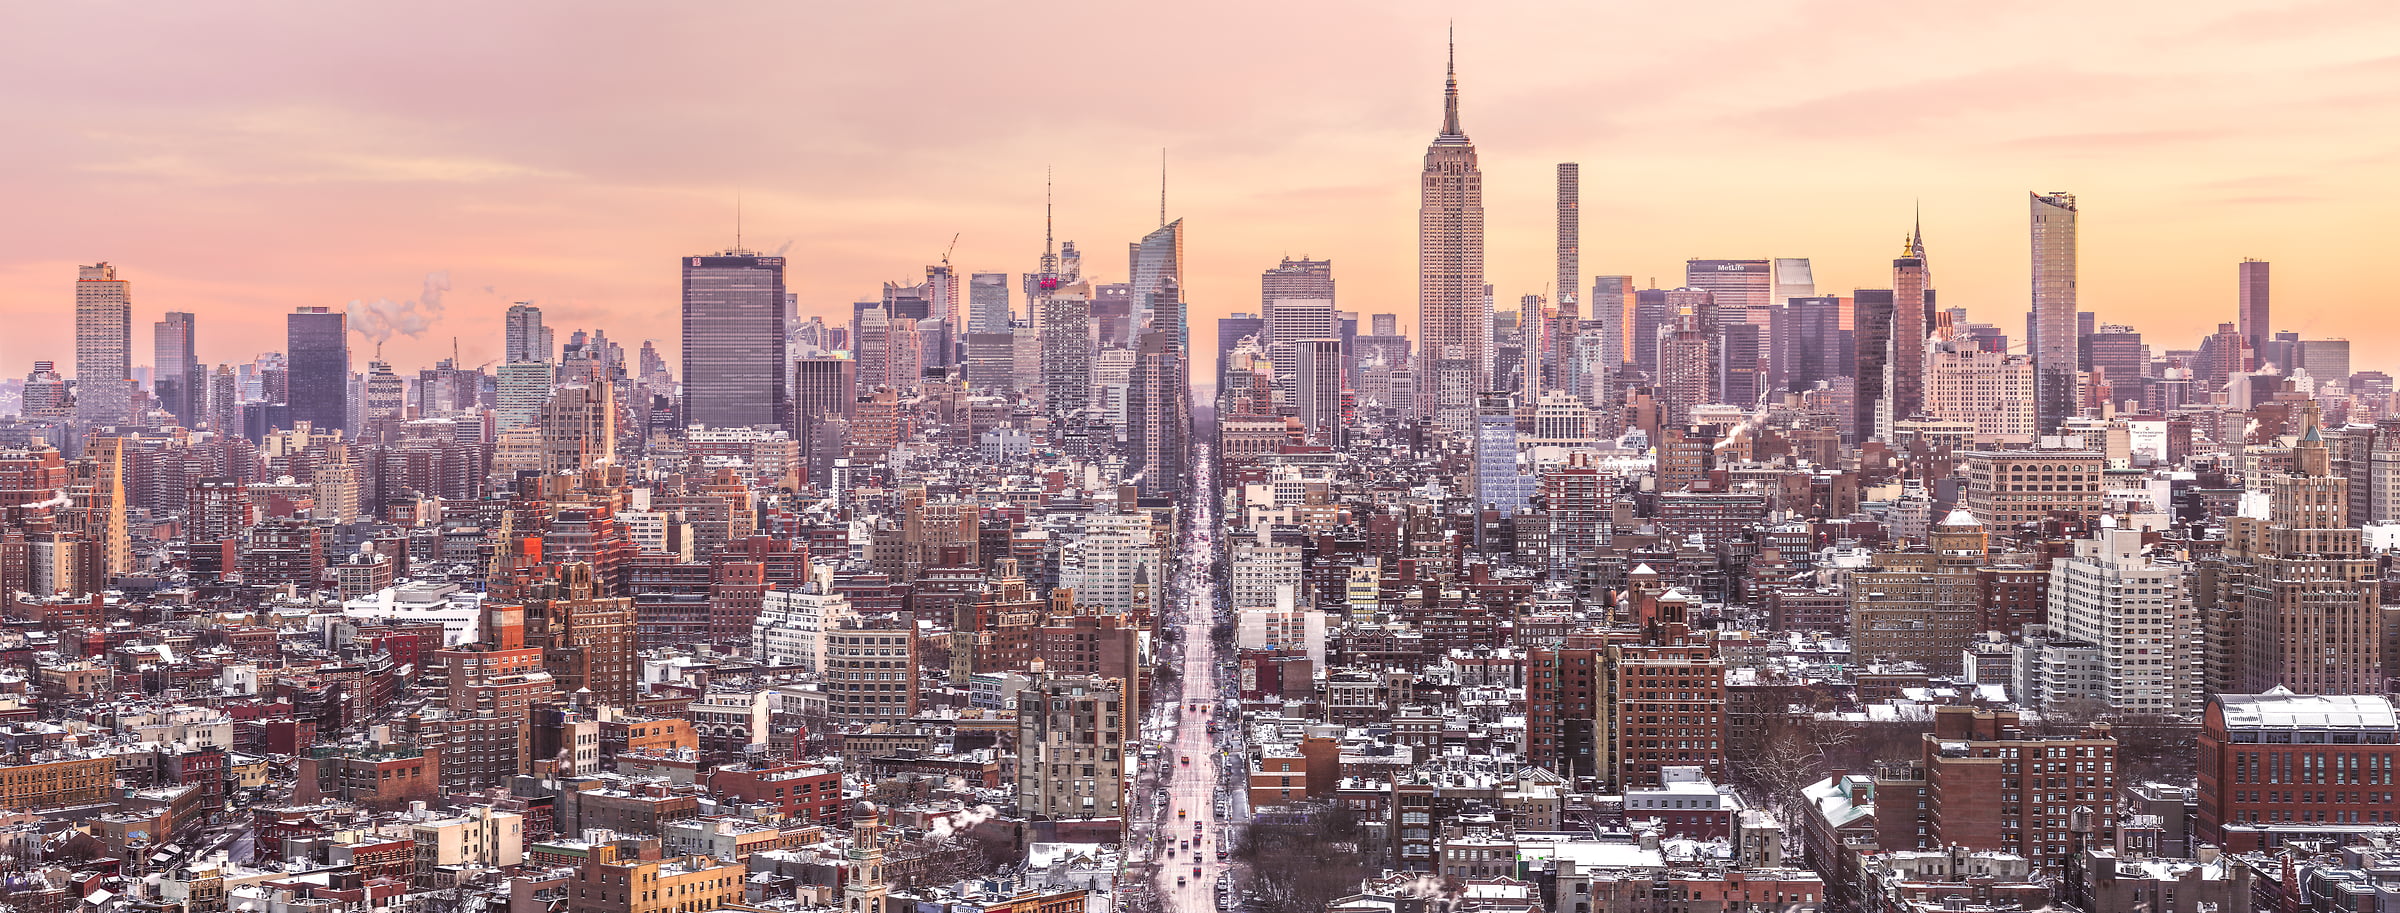 621 megapixels! A very high resolution, large-format VAST photo print of the NYC skyline in winter snow; cityscape sunrise fine art photo created by Dan Piech in New York City